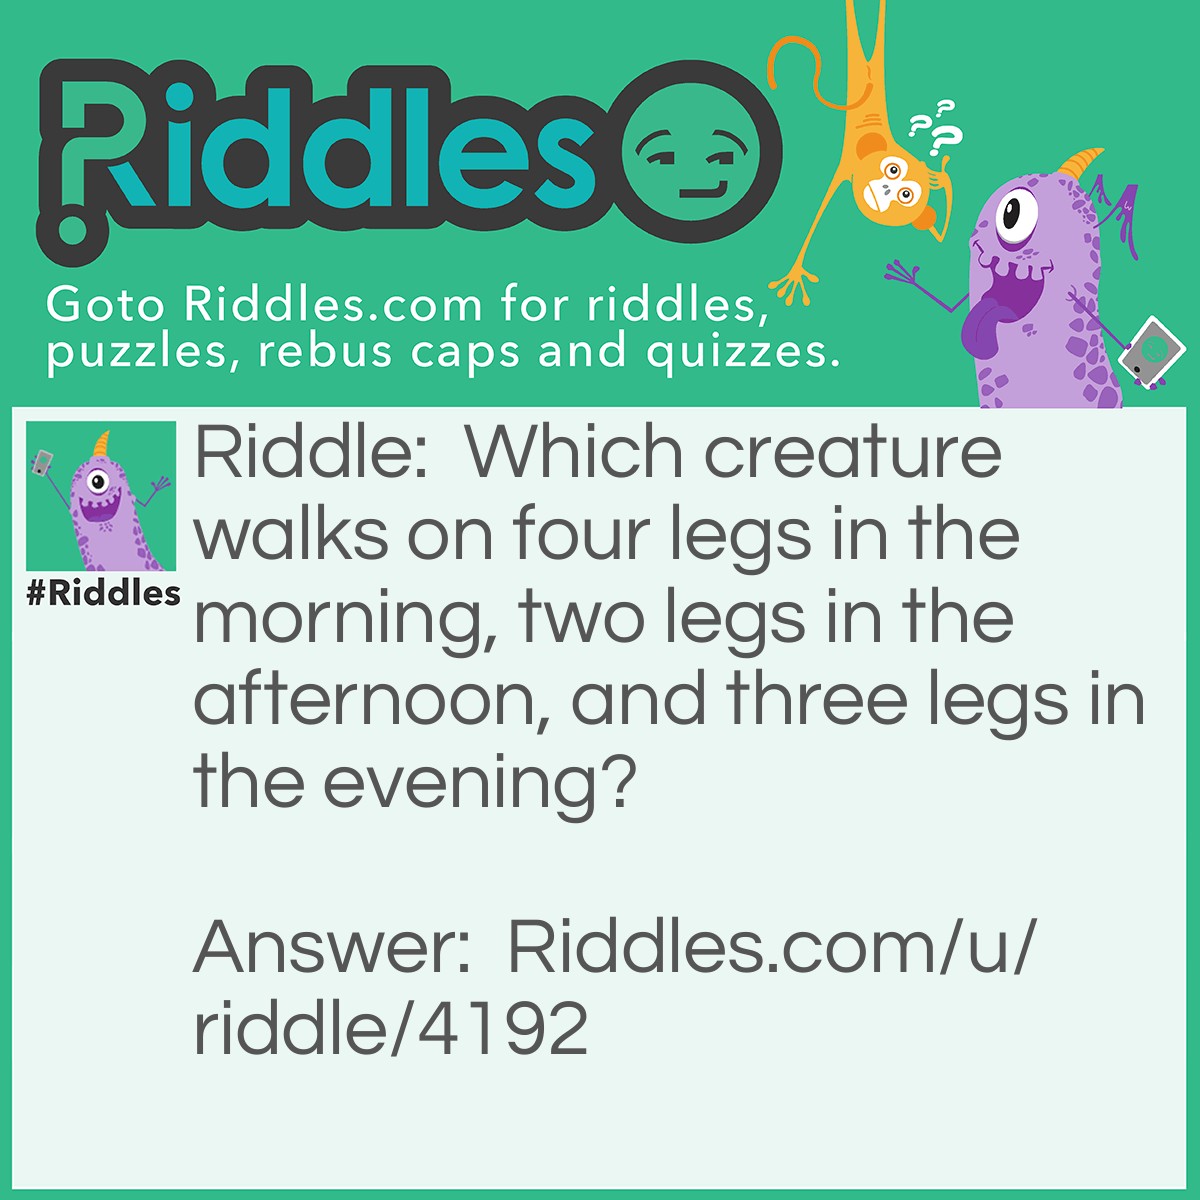 Riddle: Which creature walks on four legs in the morning, two legs in the afternoon, and three legs in the evening? Answer: Man. A baby crawls (four), an adult walks (two), and an old man has a cane (three).